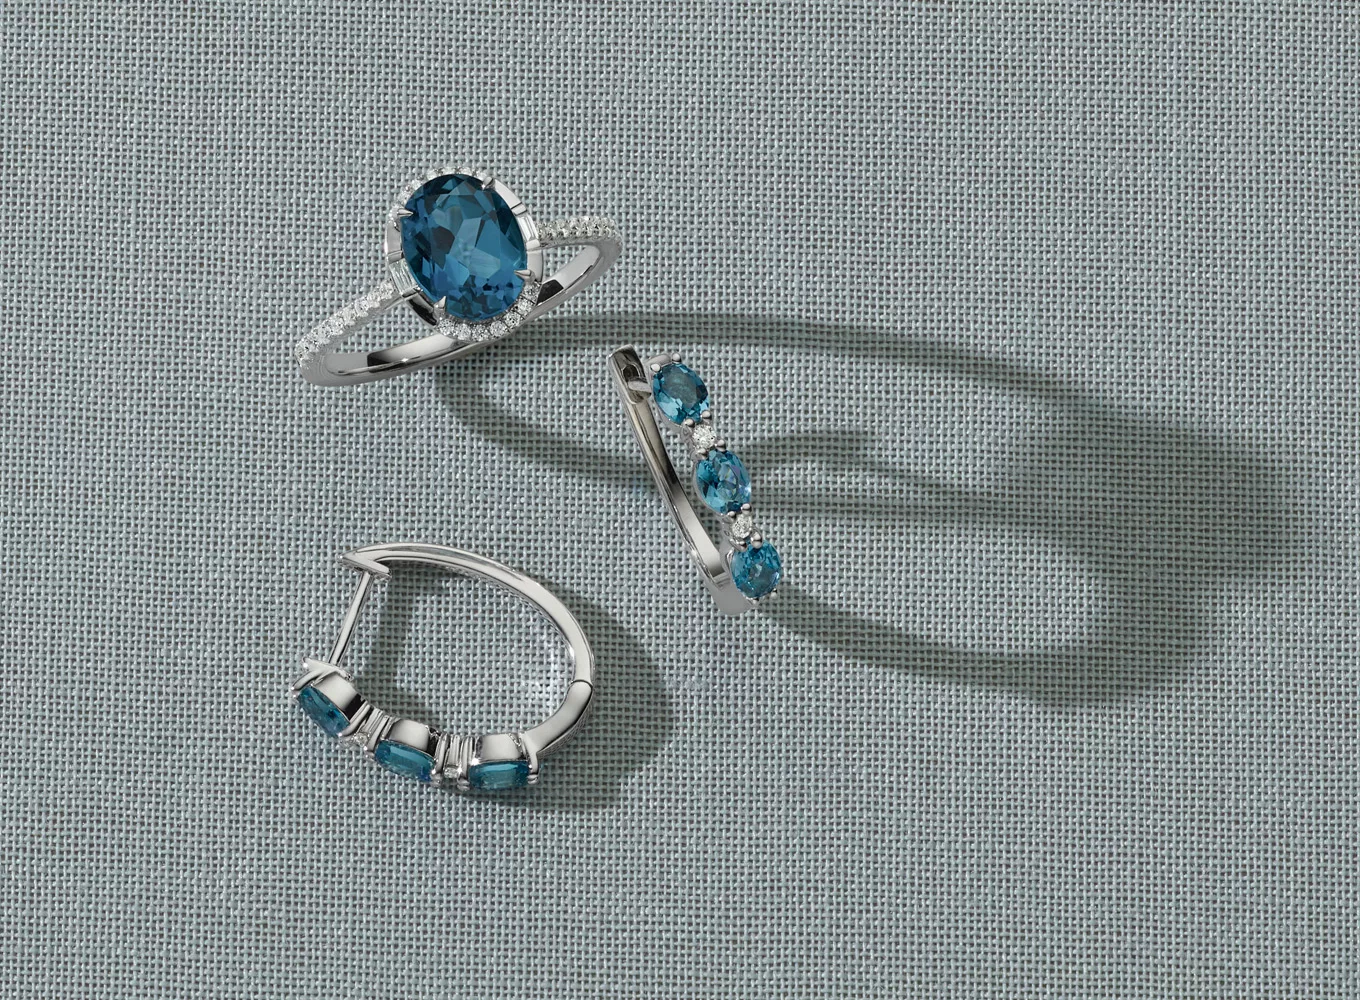 white gold ring and sterling silver hoop earrings: Monterey London Blue Topaz & Diamond Halo Ring with a gorgeous oval natural London Blue topaz gemstone at its center in a14-karat white gold ring. Blue Topaz & Diamond Hoops in Sterling Silver adds a pop of color to any look with these natural London blue topaz hoop earrings. Crafted in quality sterling silver, they feature natural diamond accents between each gemstone for a touch of sparkle.